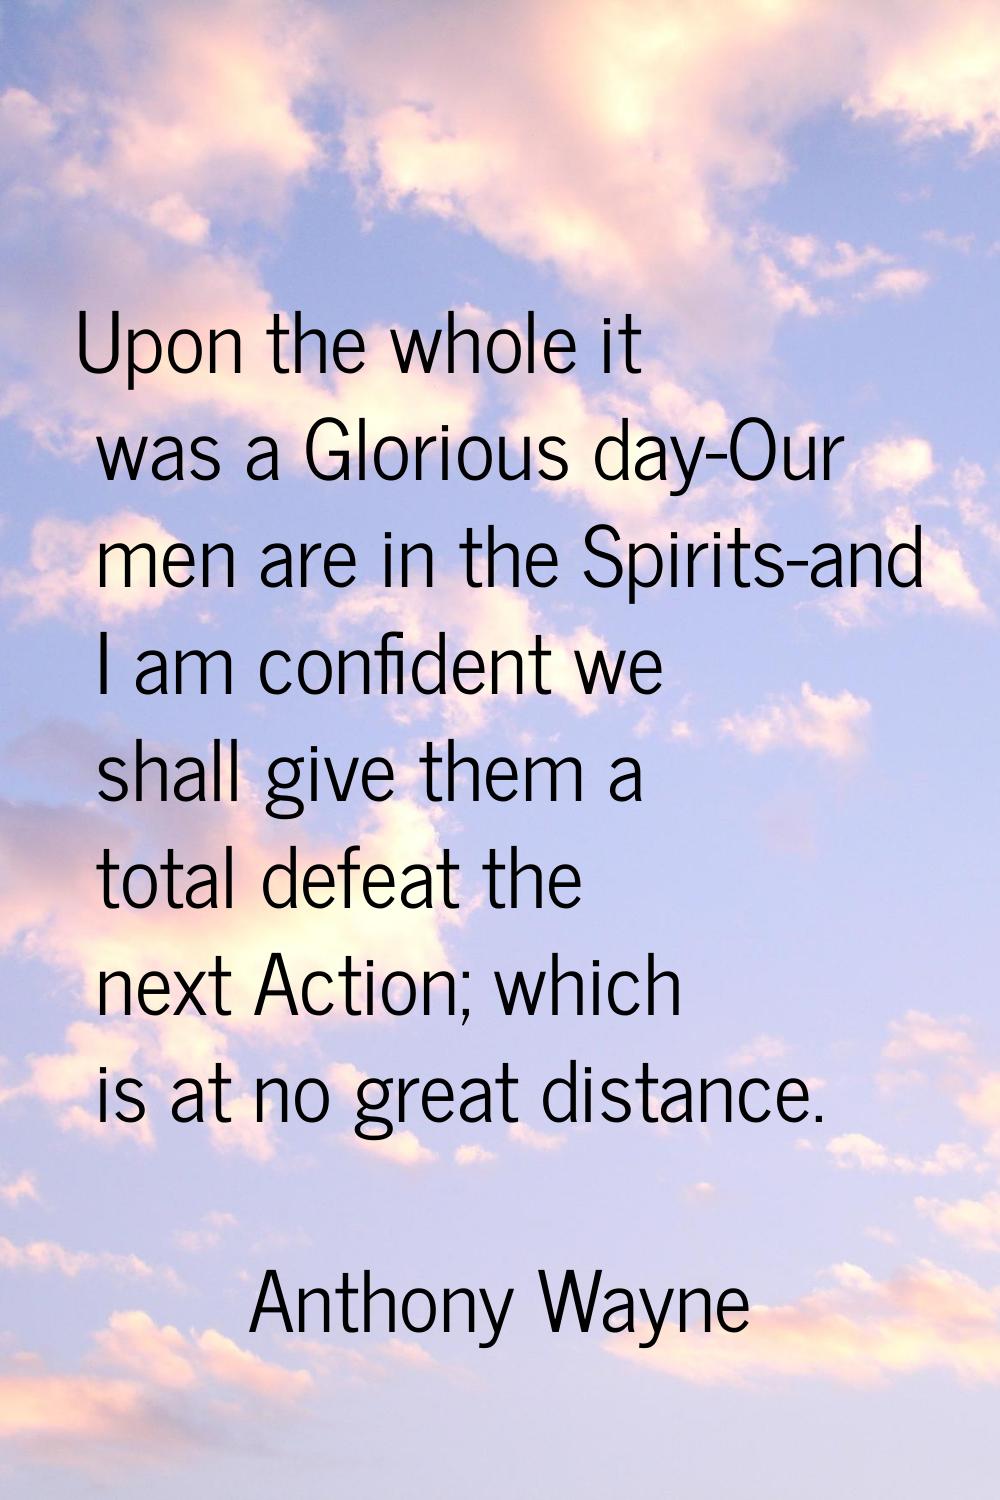 Upon the whole it was a Glorious day-Our men are in the Spirits-and I am confident we shall give th